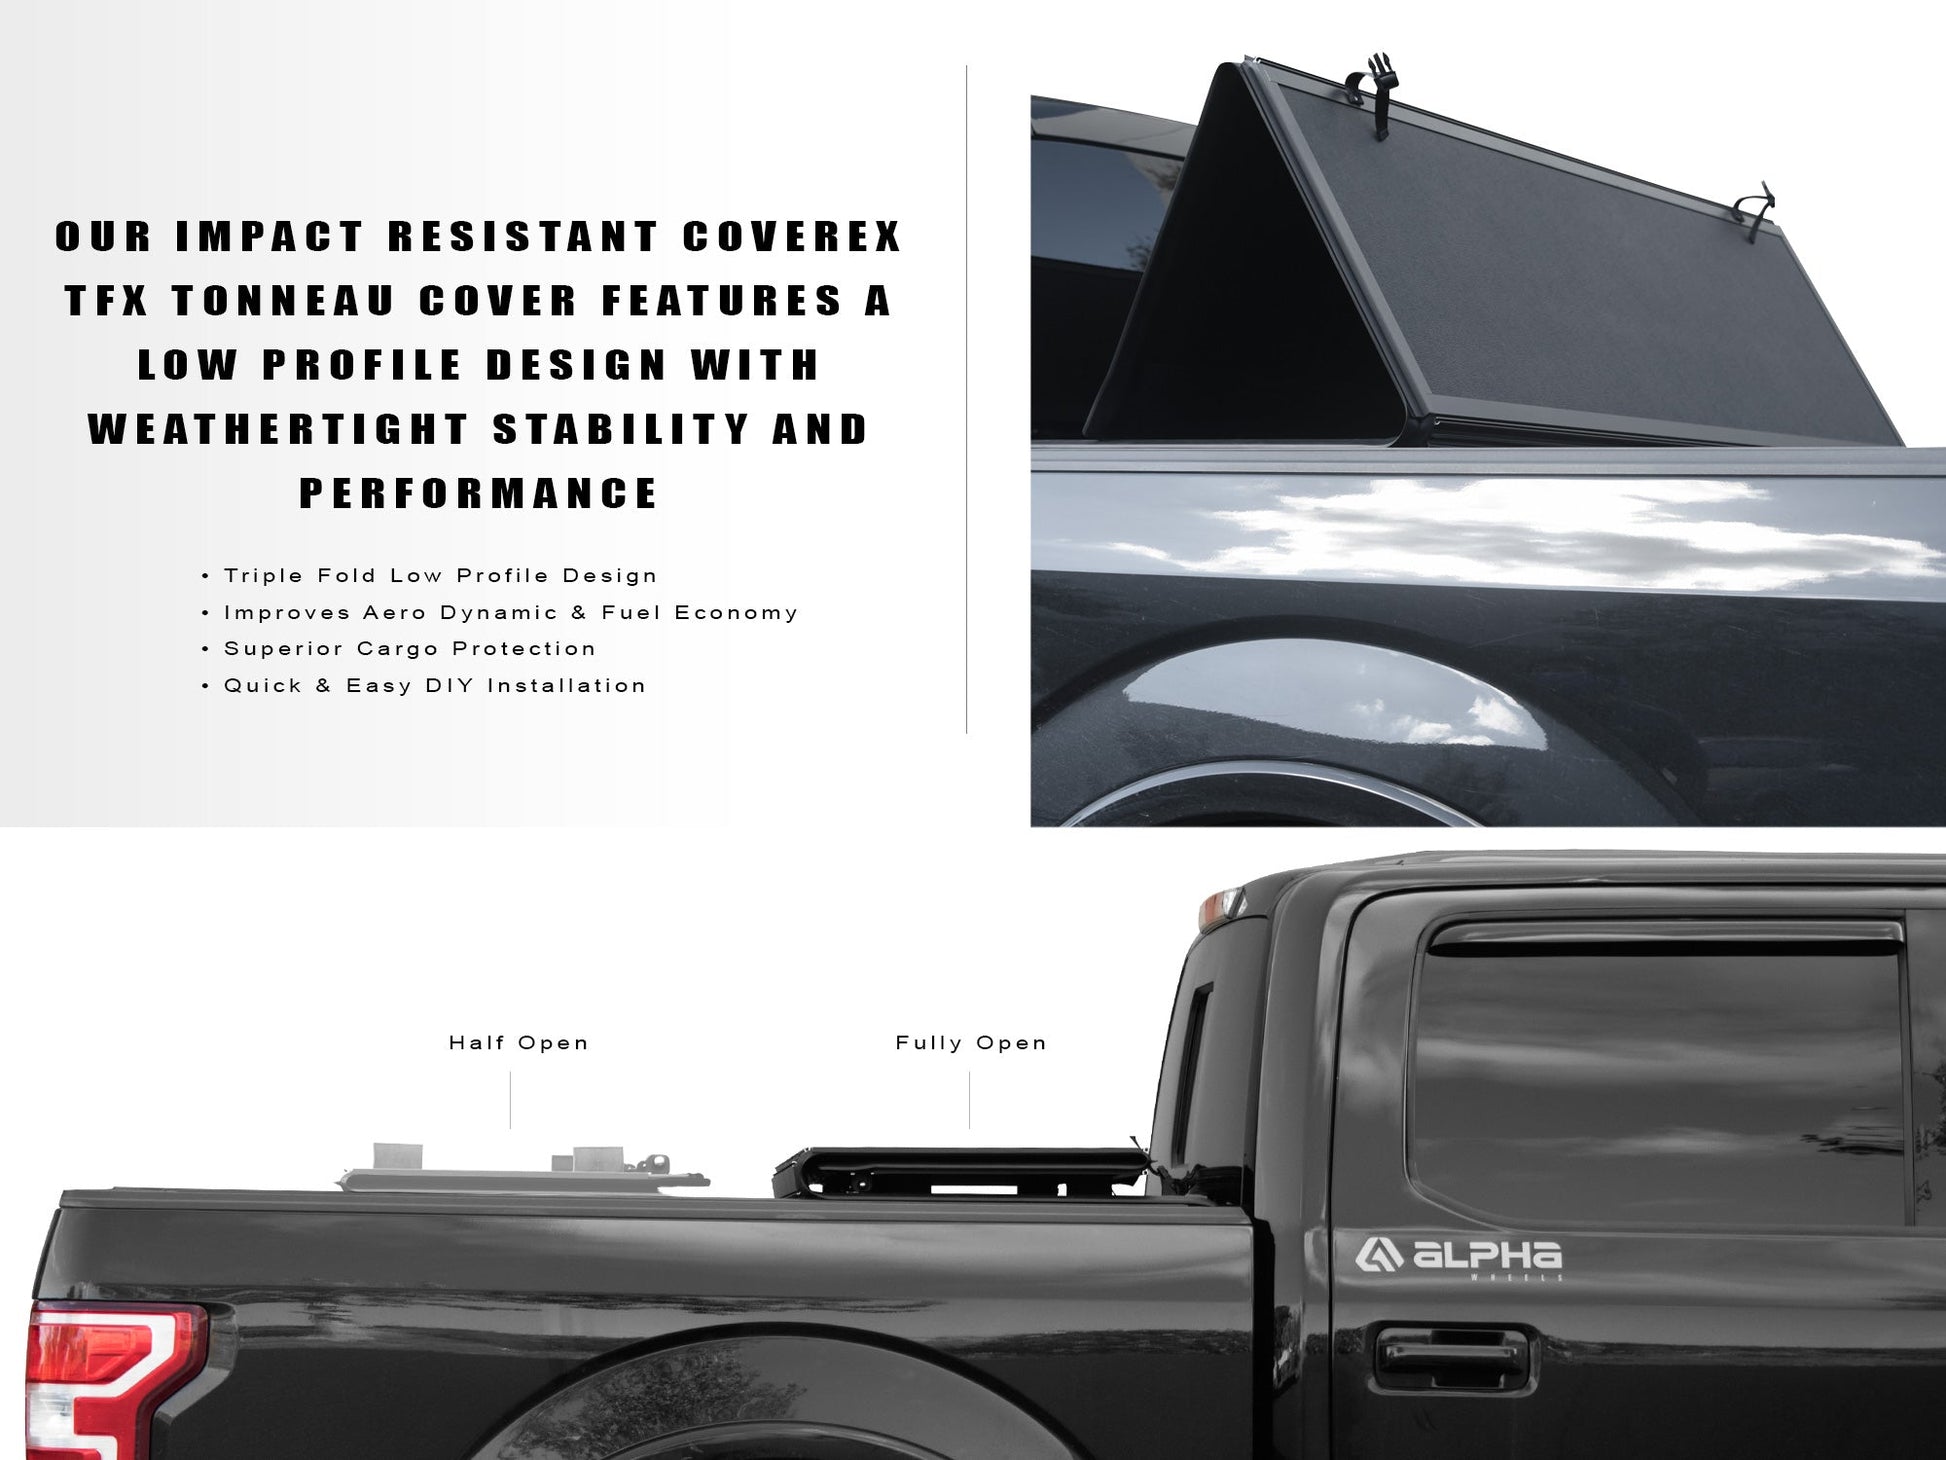 Armordillo 2014-2021 Toyota Tundra CoveRex TFX Series Folding Truck Bed Tonneau Cover (6.5 Ft Bed) (W/O Utility Track) - Bayson R Motorsports